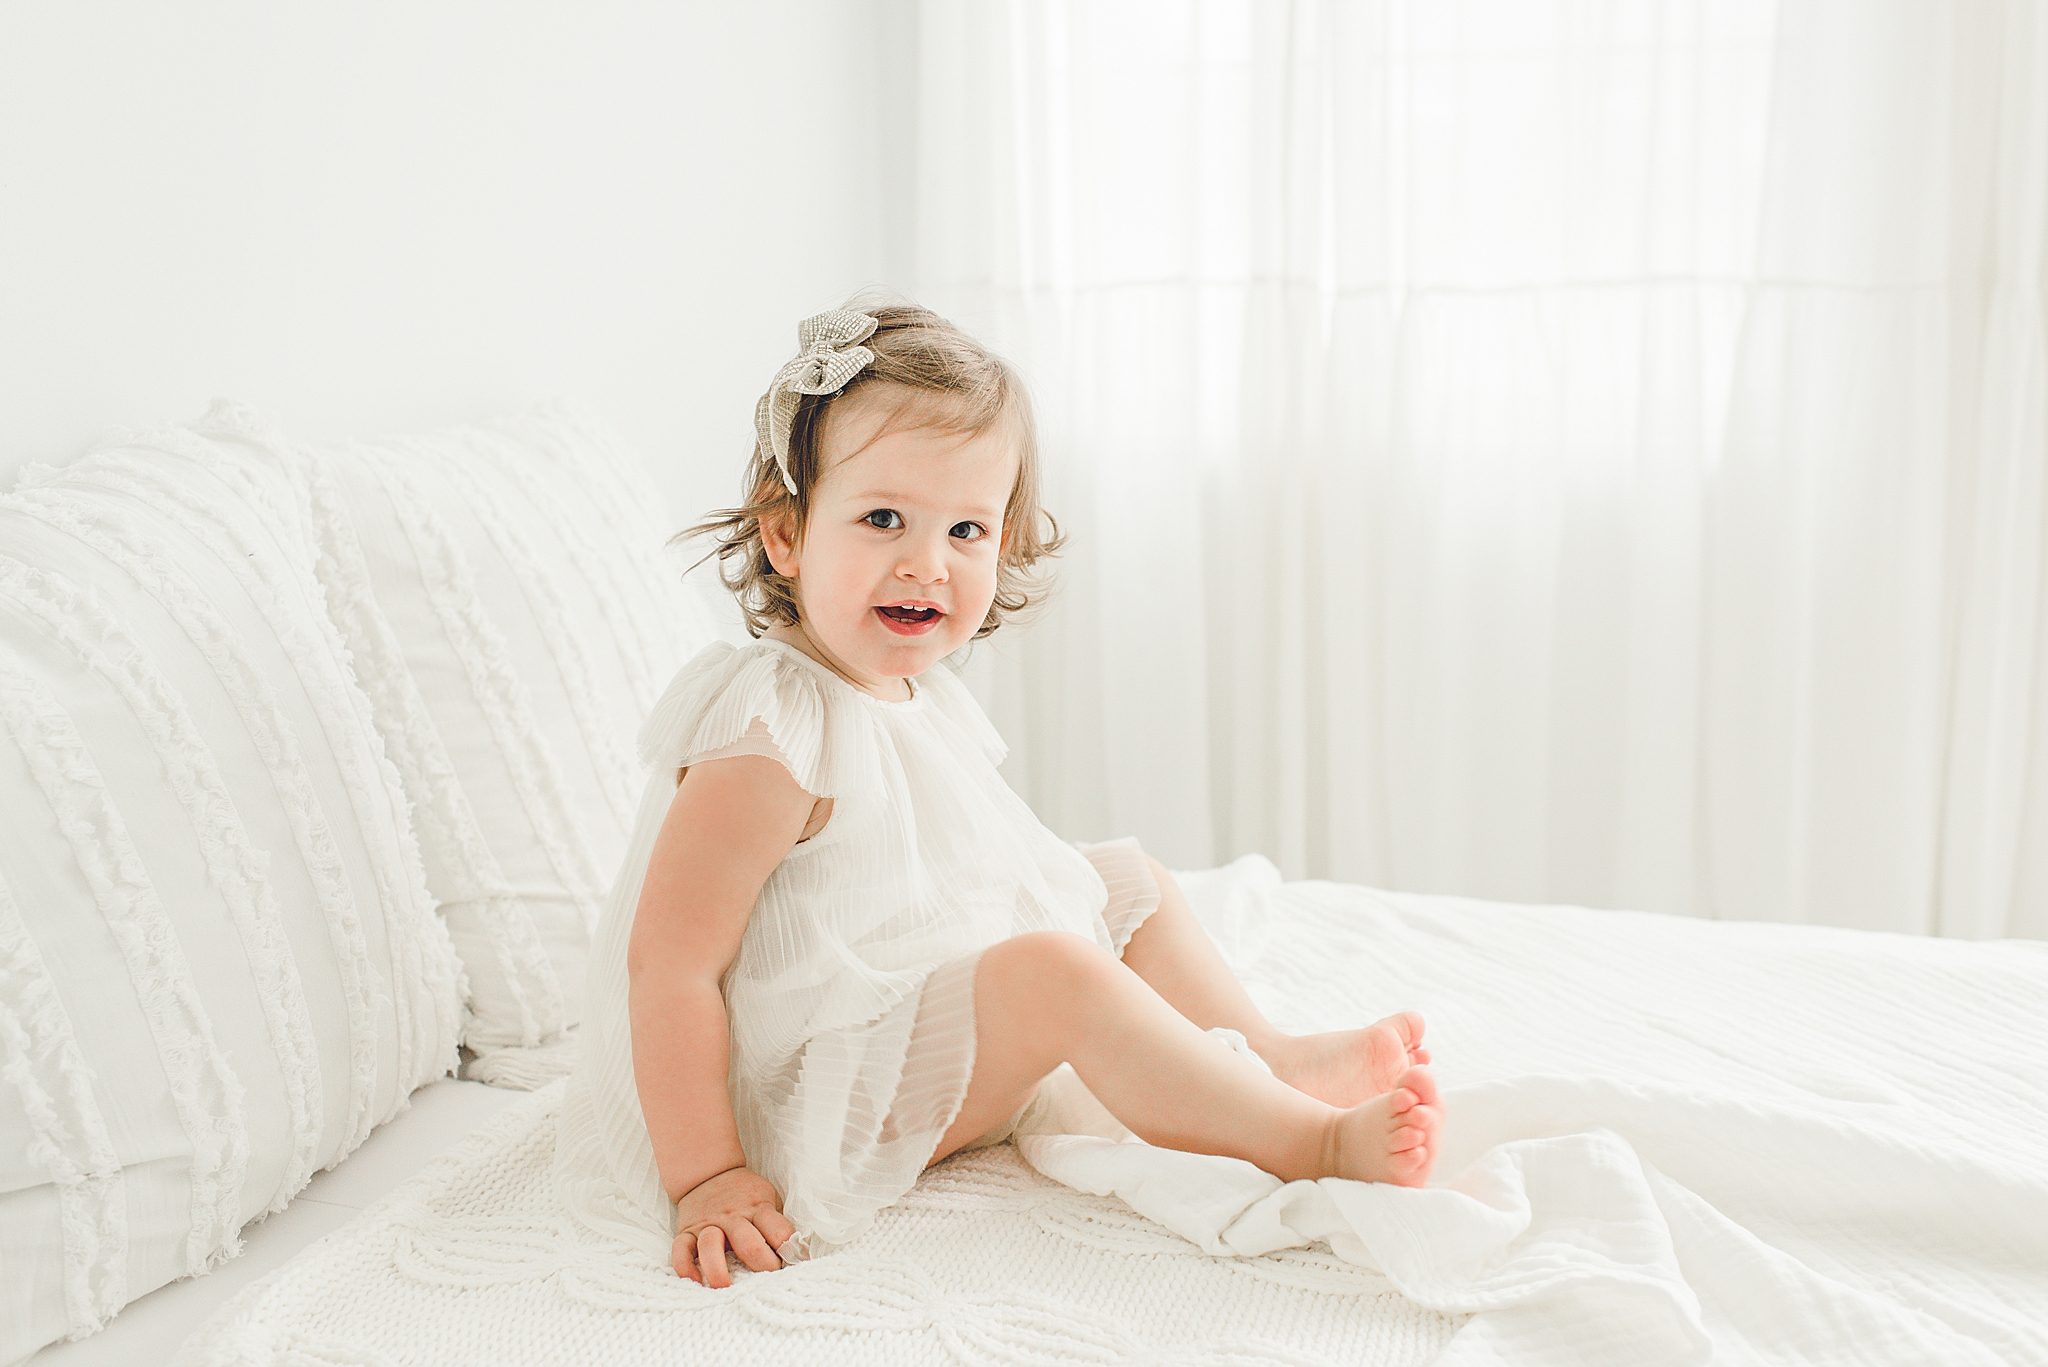 Kettering Ohio Baby Photographer | Adeline at 18 months!